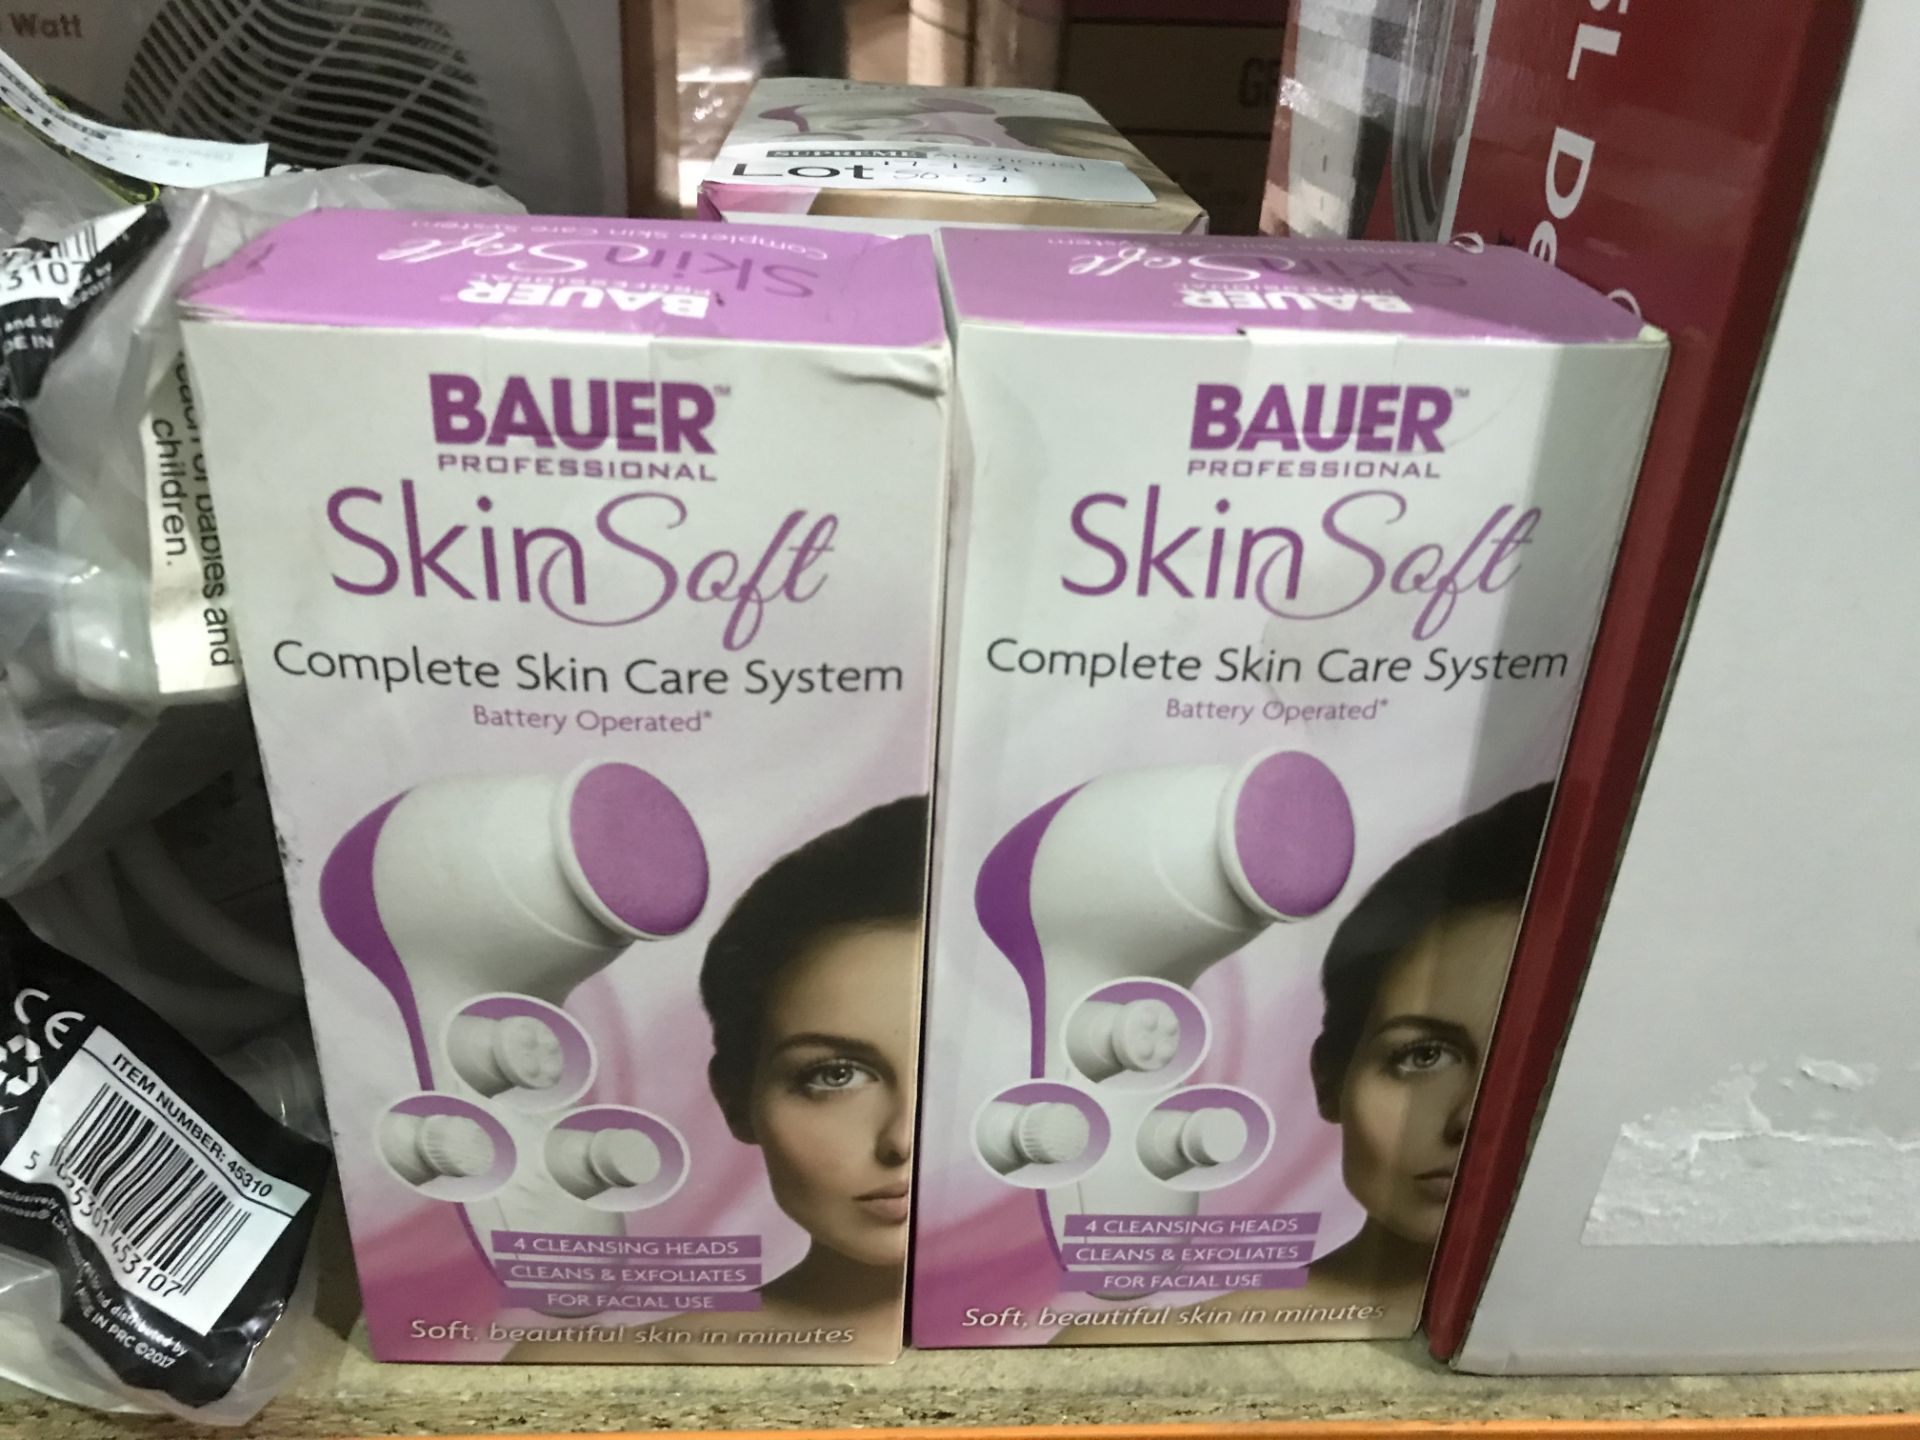 4 X BAUERE PROFESSIONAL SKIN SOFT COMPLETE SKIN CARE SYSTEM